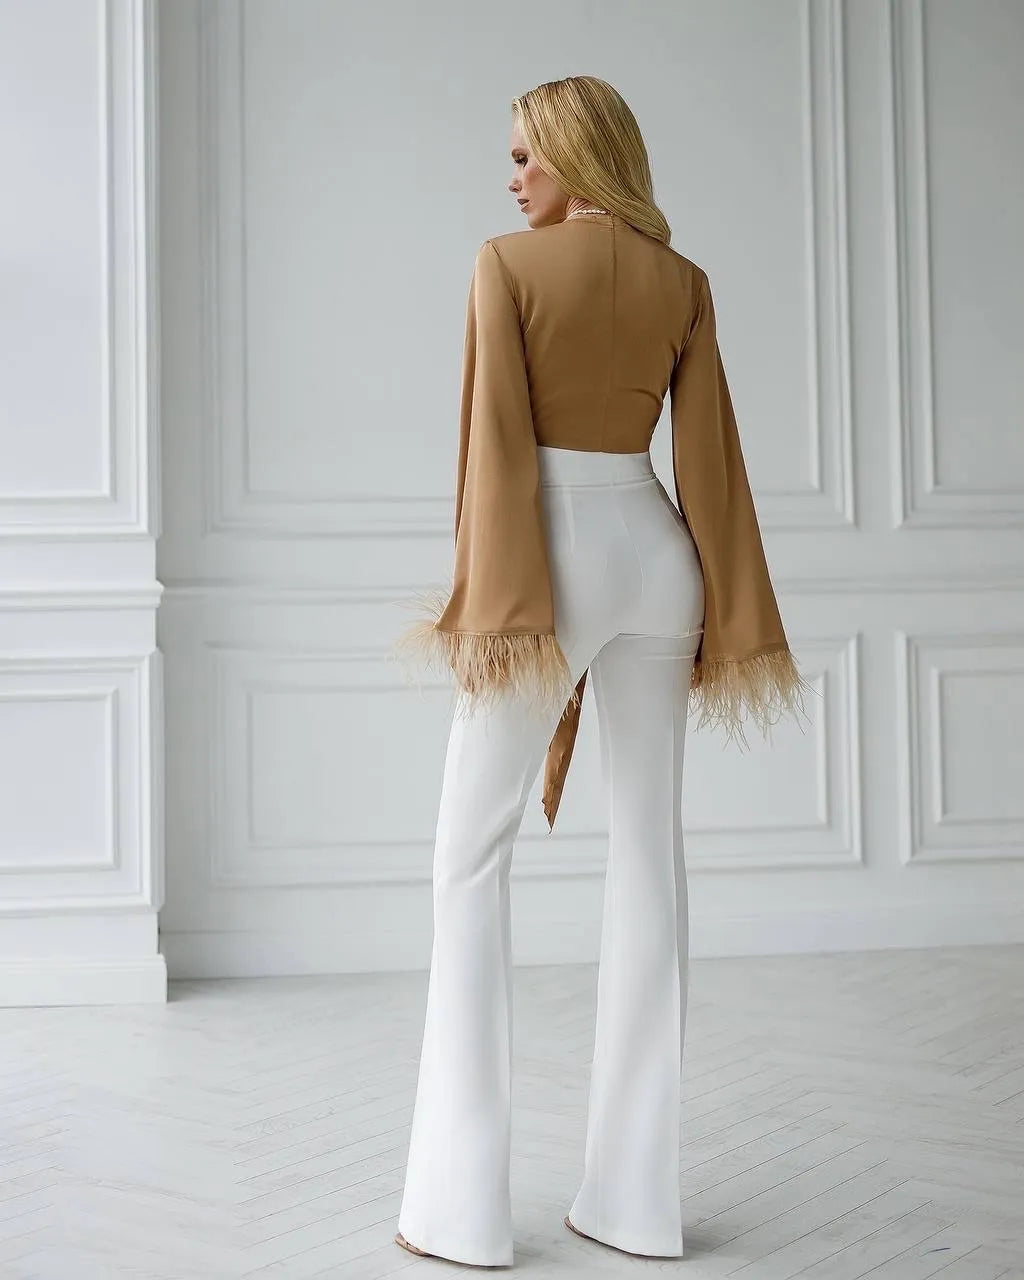 White trousers "High waist flares"